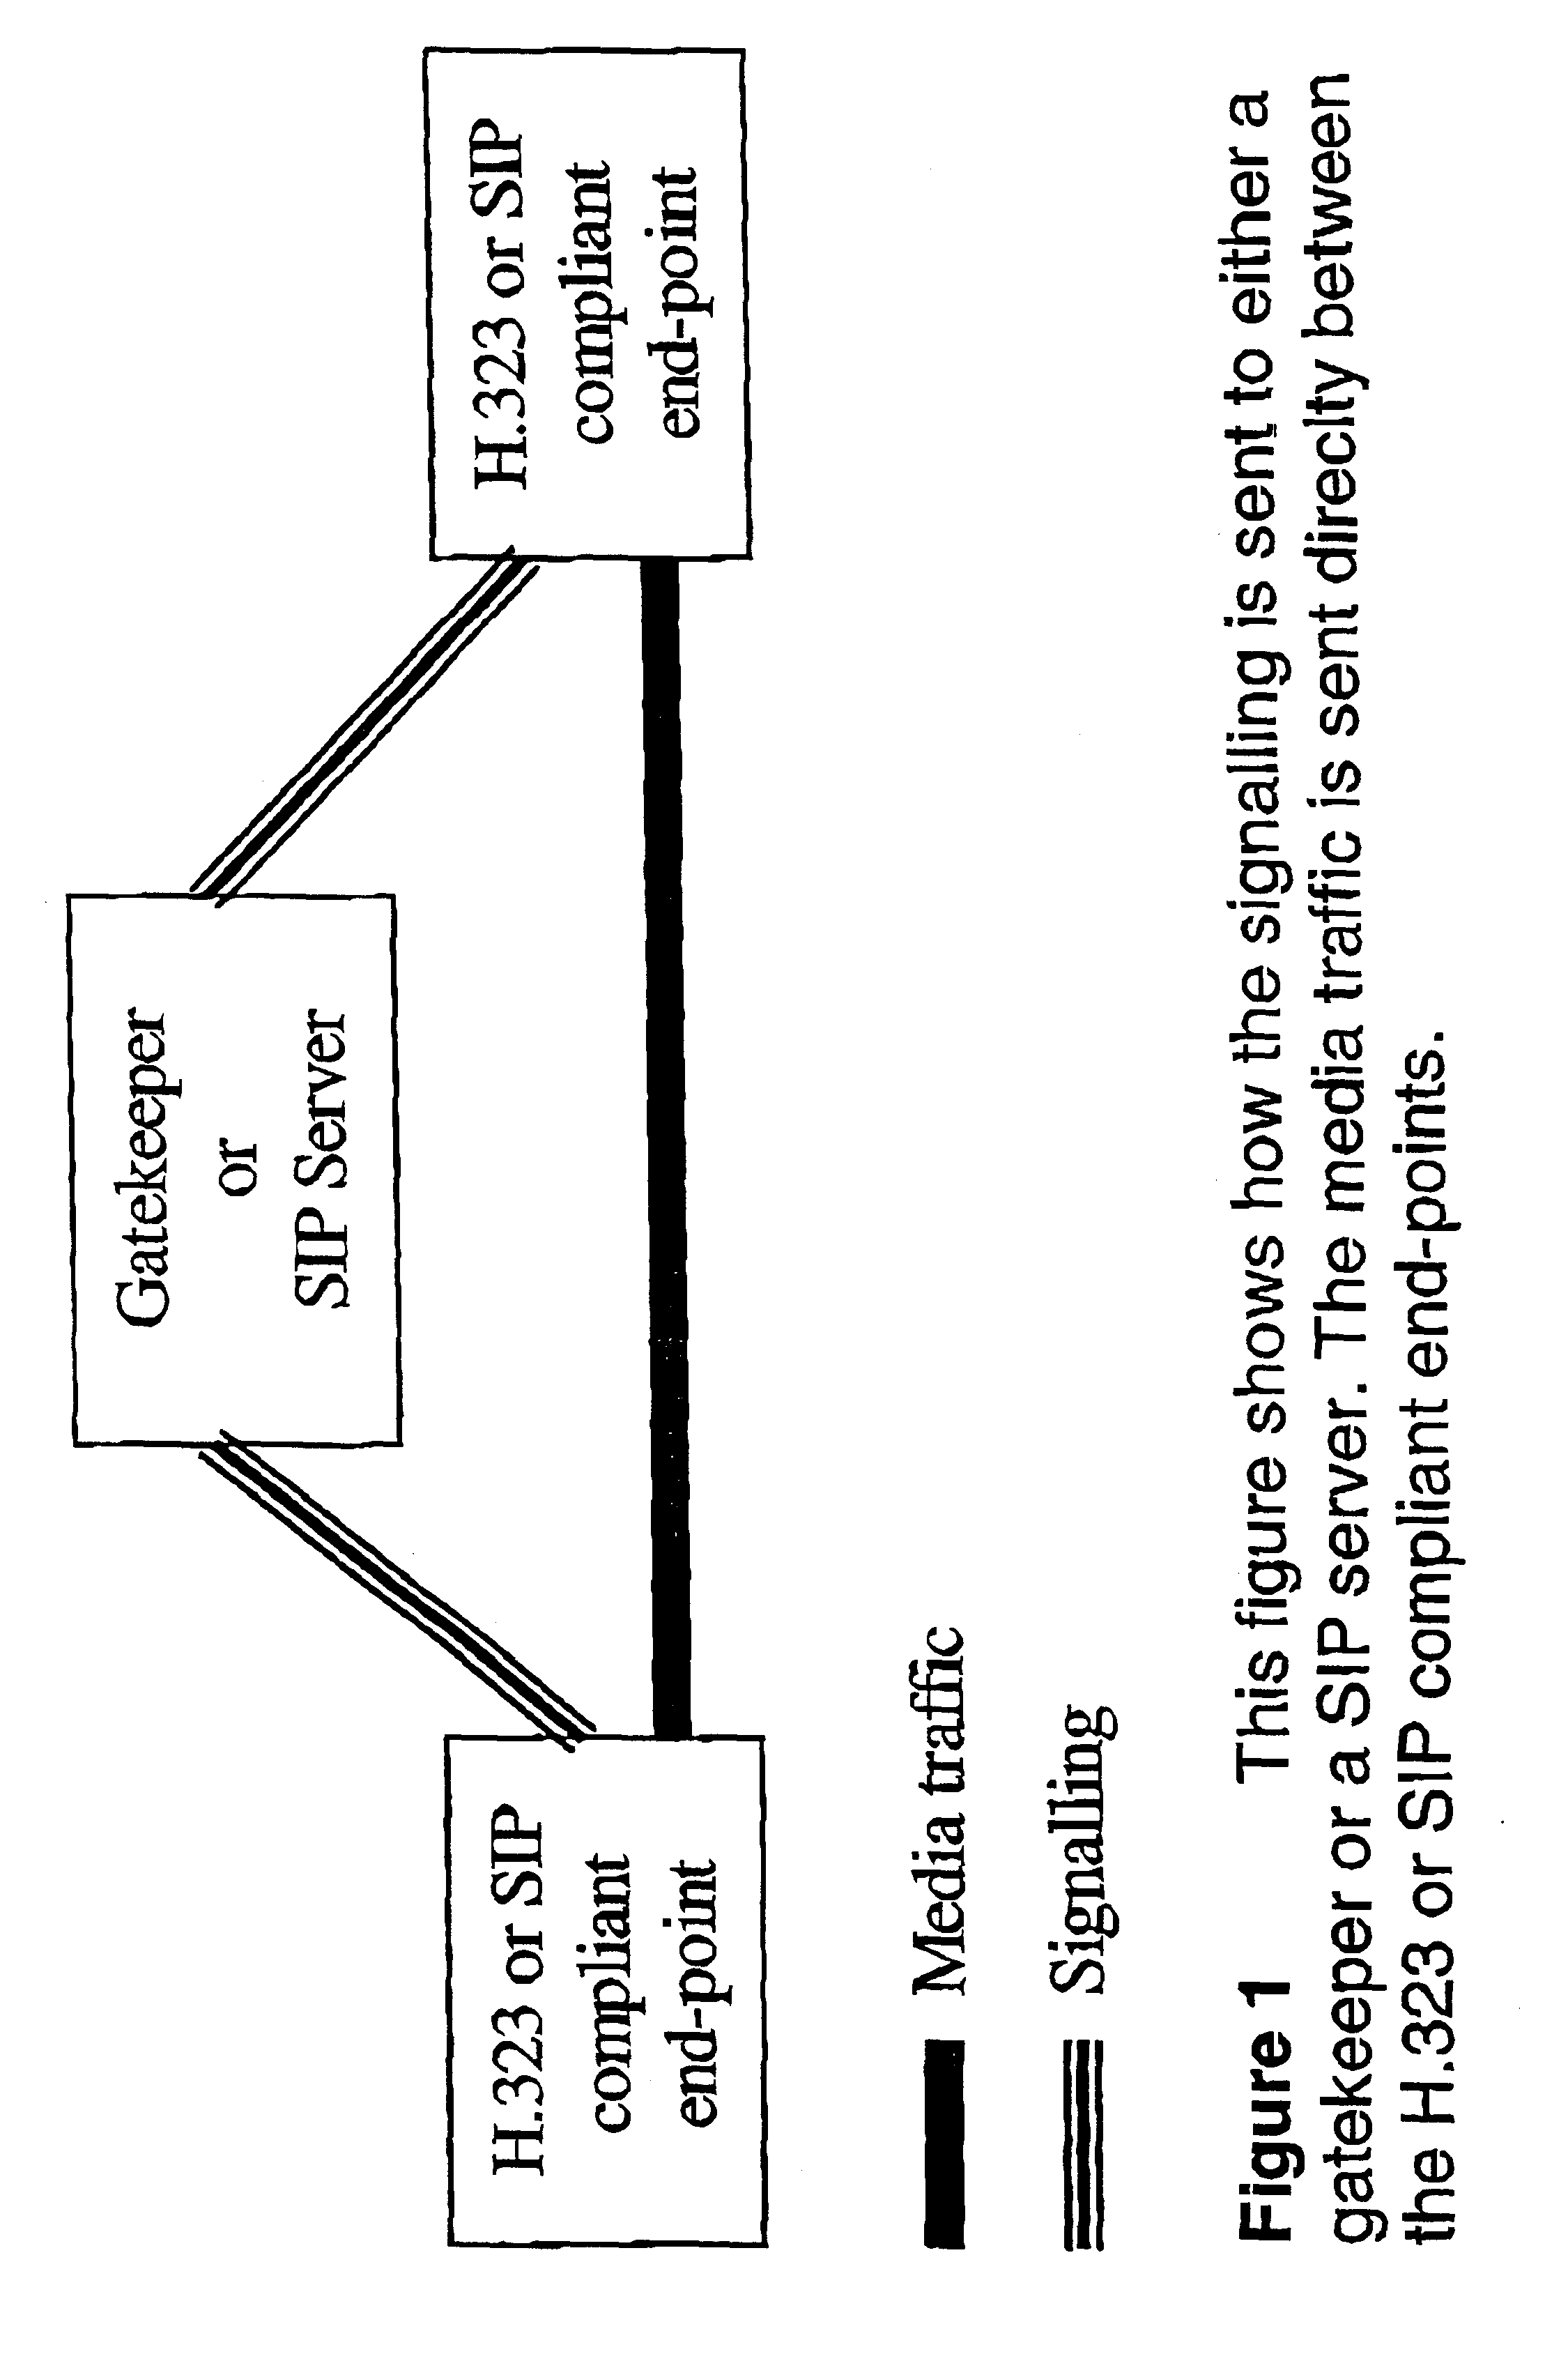 Method for extending the use of SIP (session initiation protocol)